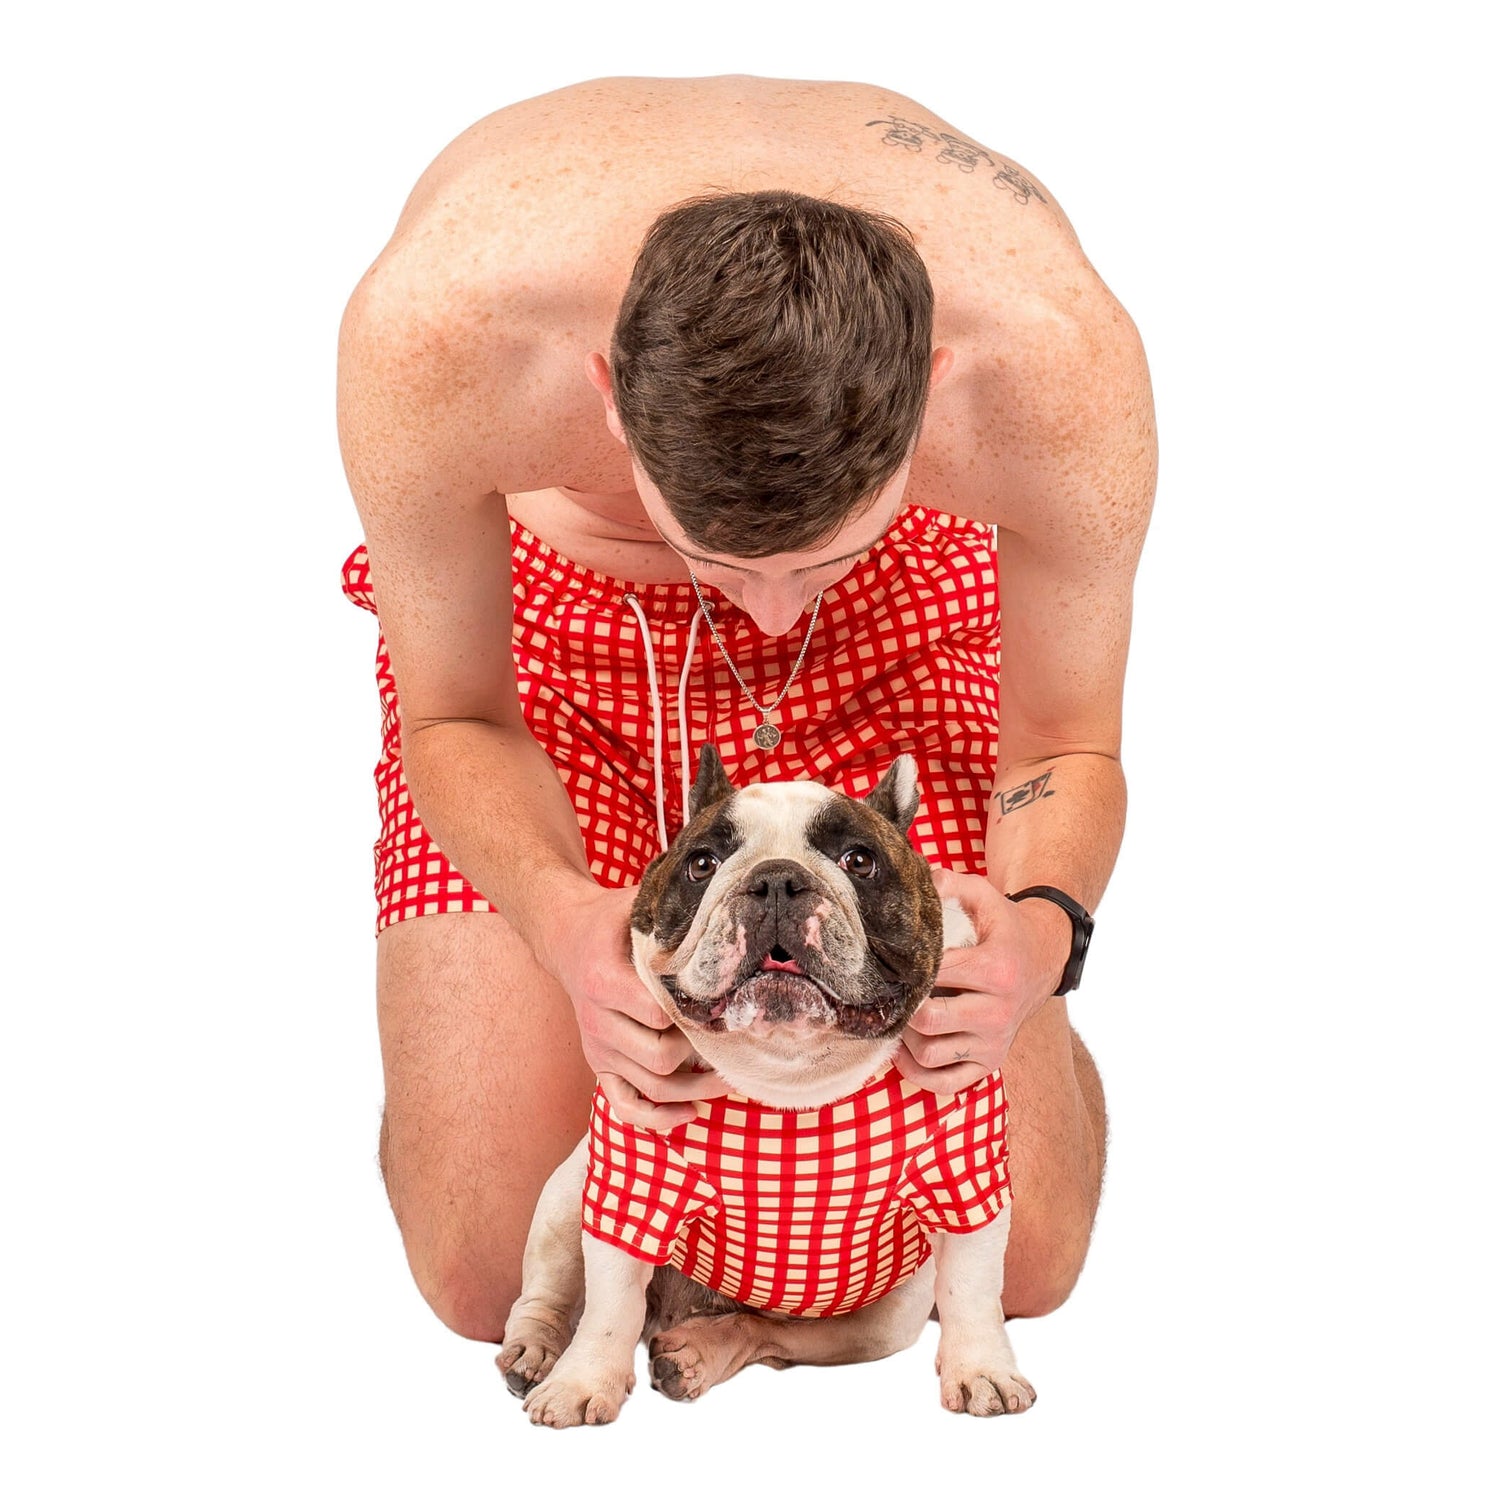 A male model and French Bulldog wearing VIbrant Hounds Red Gingham swimwear. The Brindle Pied French Bulldog is wearing a red gingham rash shirt that is UPF50 and the male model is wearing red gingham swim shorts.